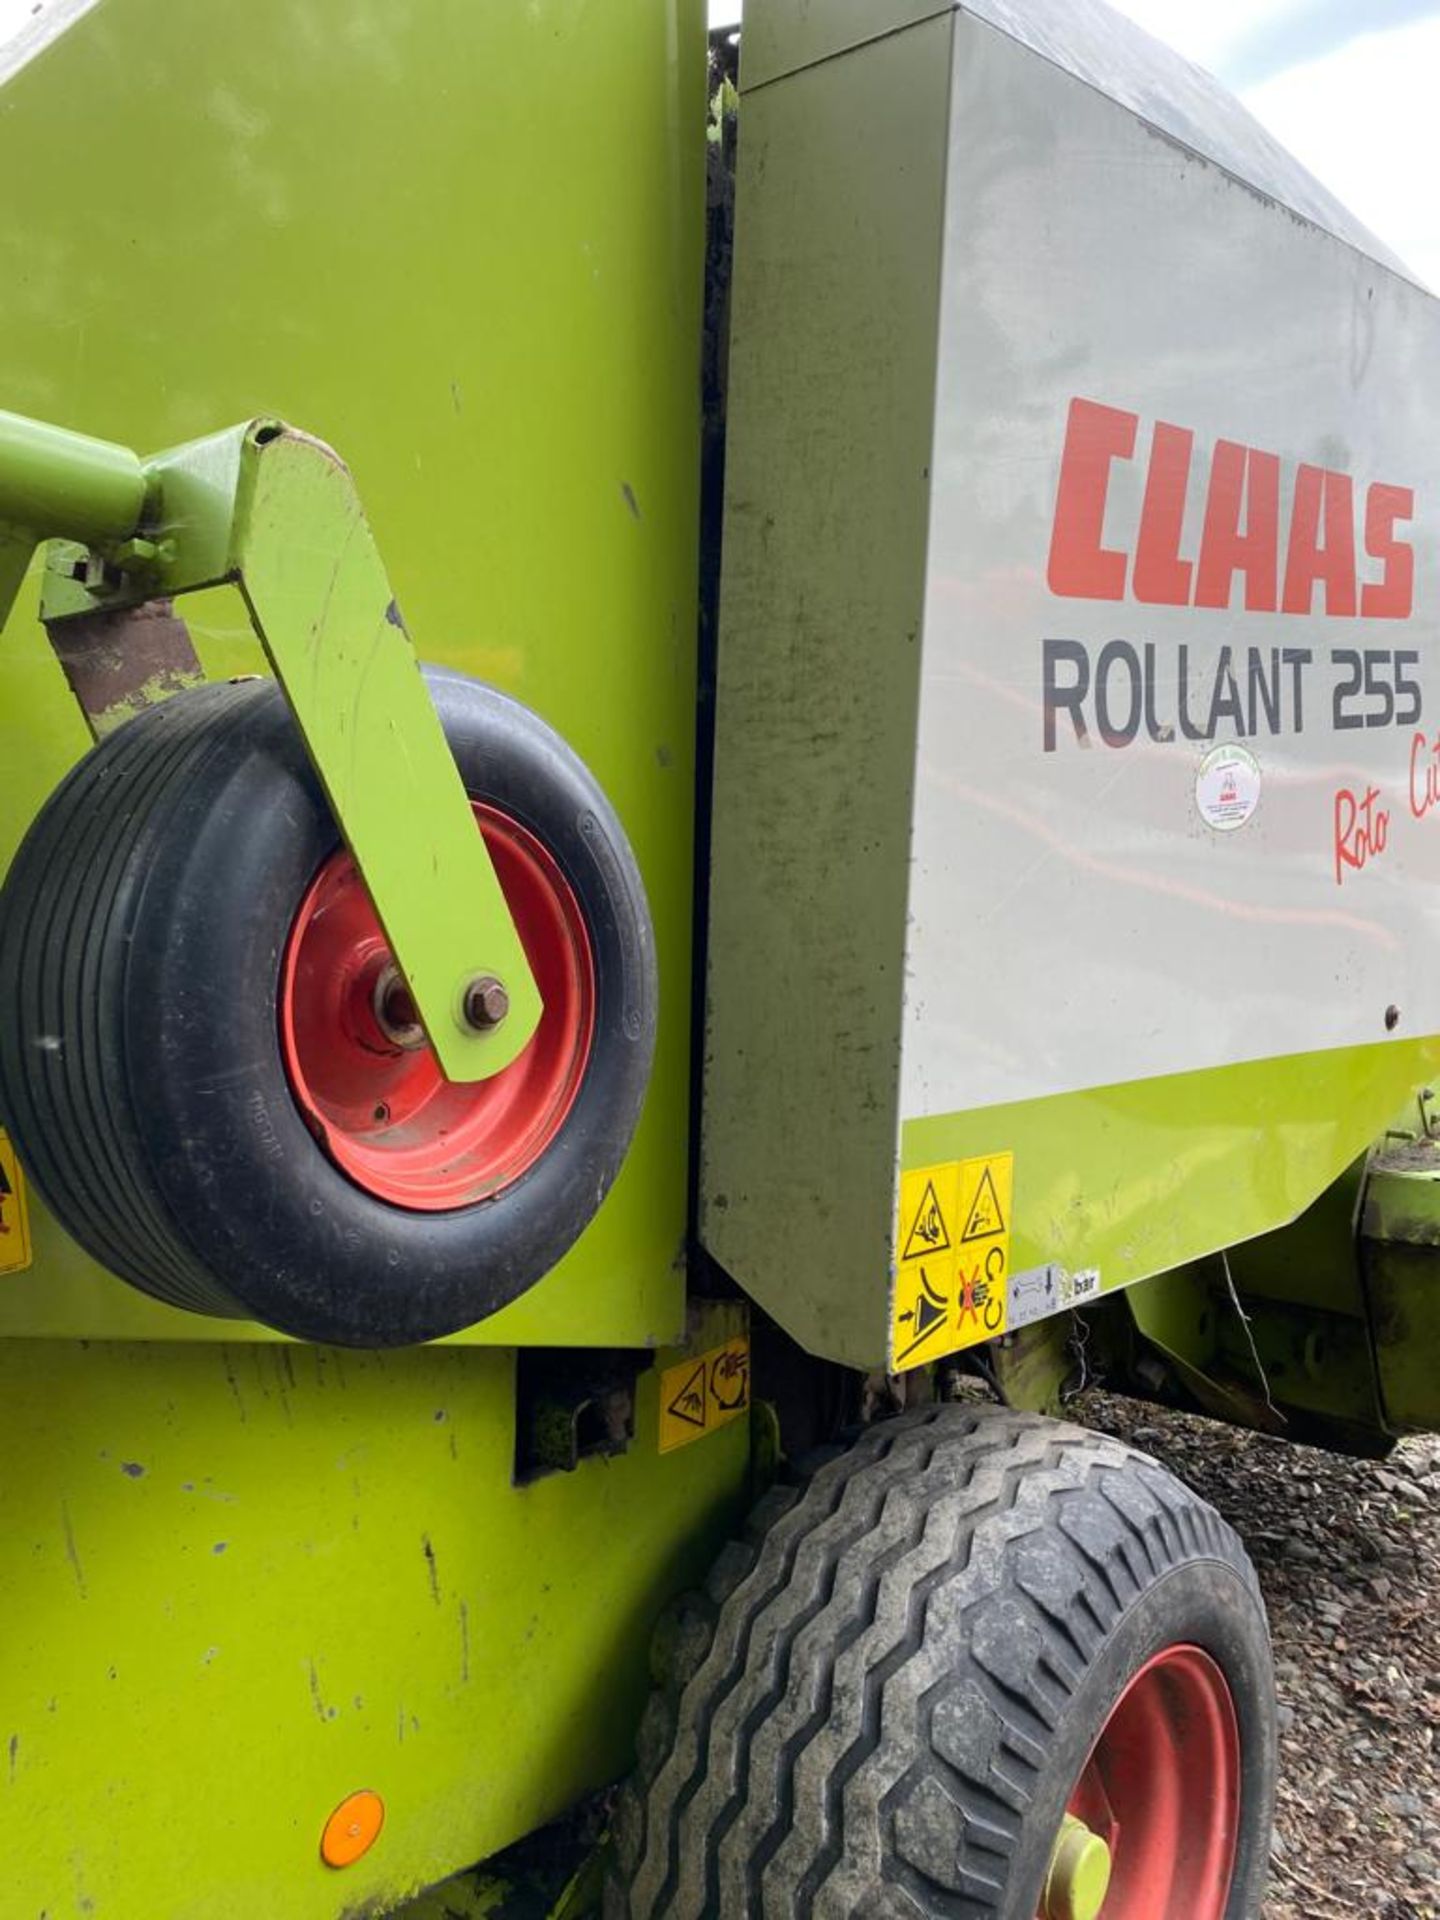 CLAAS ROLLANT 255 ROTO CUT ROUND BALER - Image 6 of 9